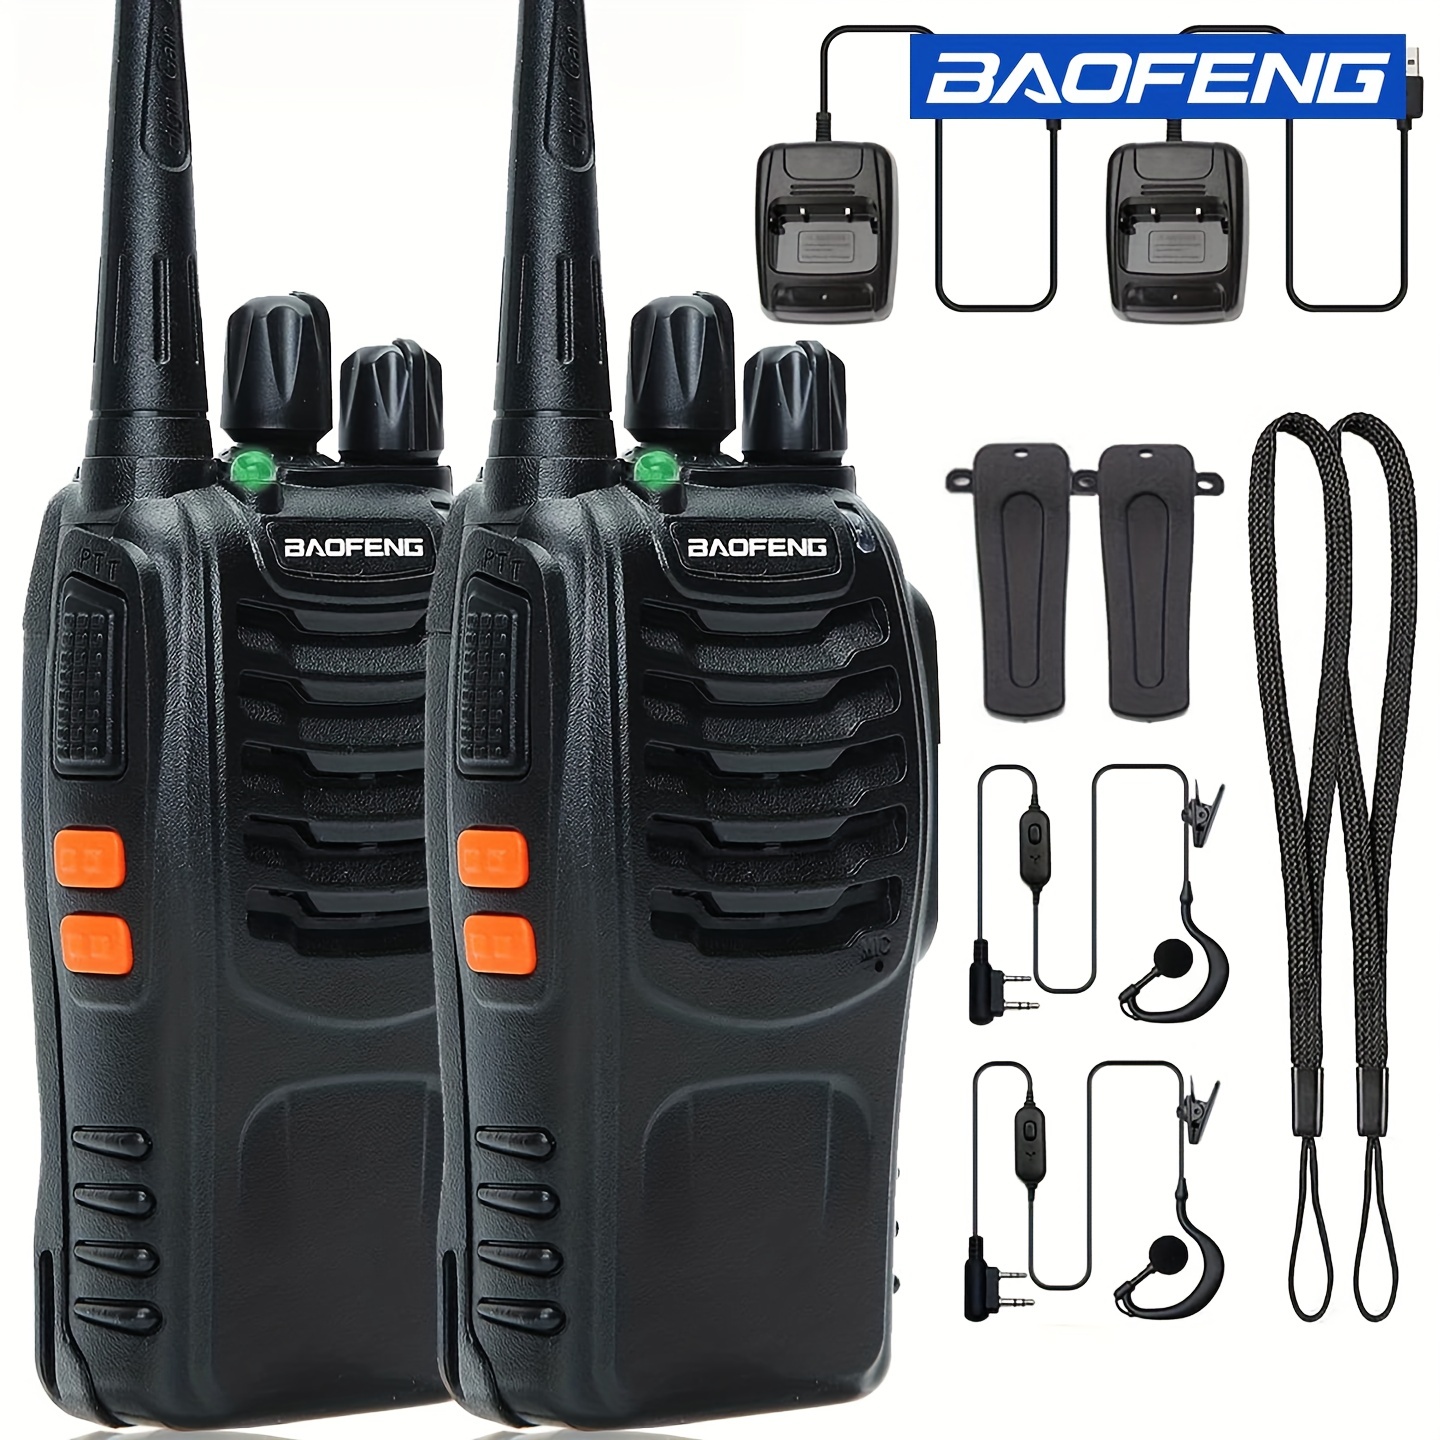 Retevis RT68 Two Way Radios with Earpiece, Heavy Duty Walkie Talkies for Adults, Compact Way Radio Long Range Rechargeable with USB Charging Base, f - 1